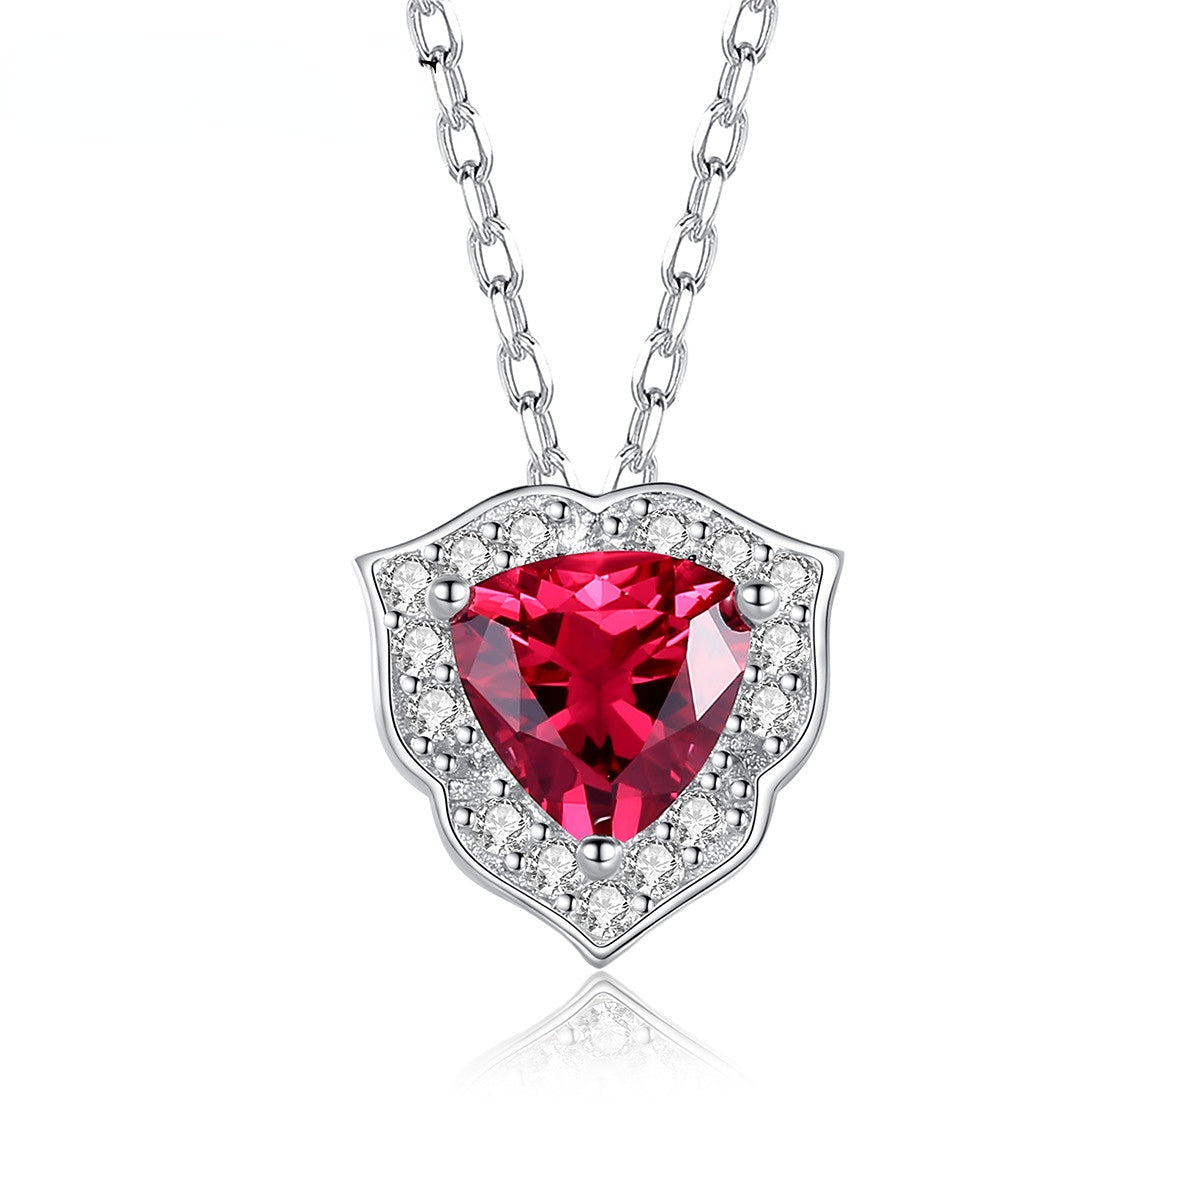 Gemstonely-S925 Silver Lock Necklace with Triangular Simulate Ruby Gemstone Pendant for Women